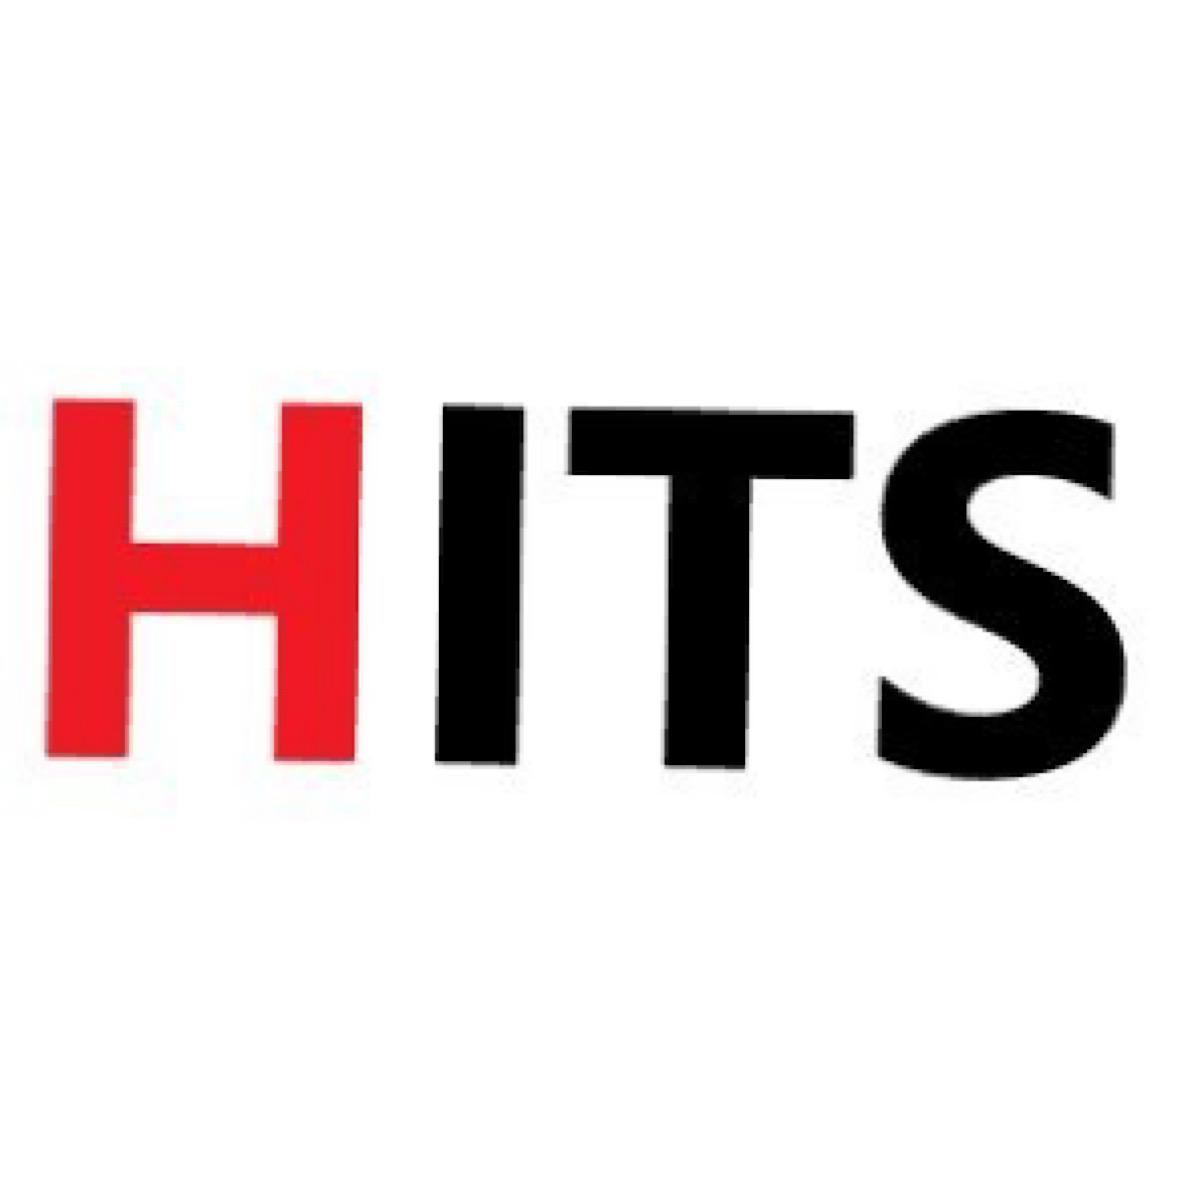 All The Hits 680 Top40